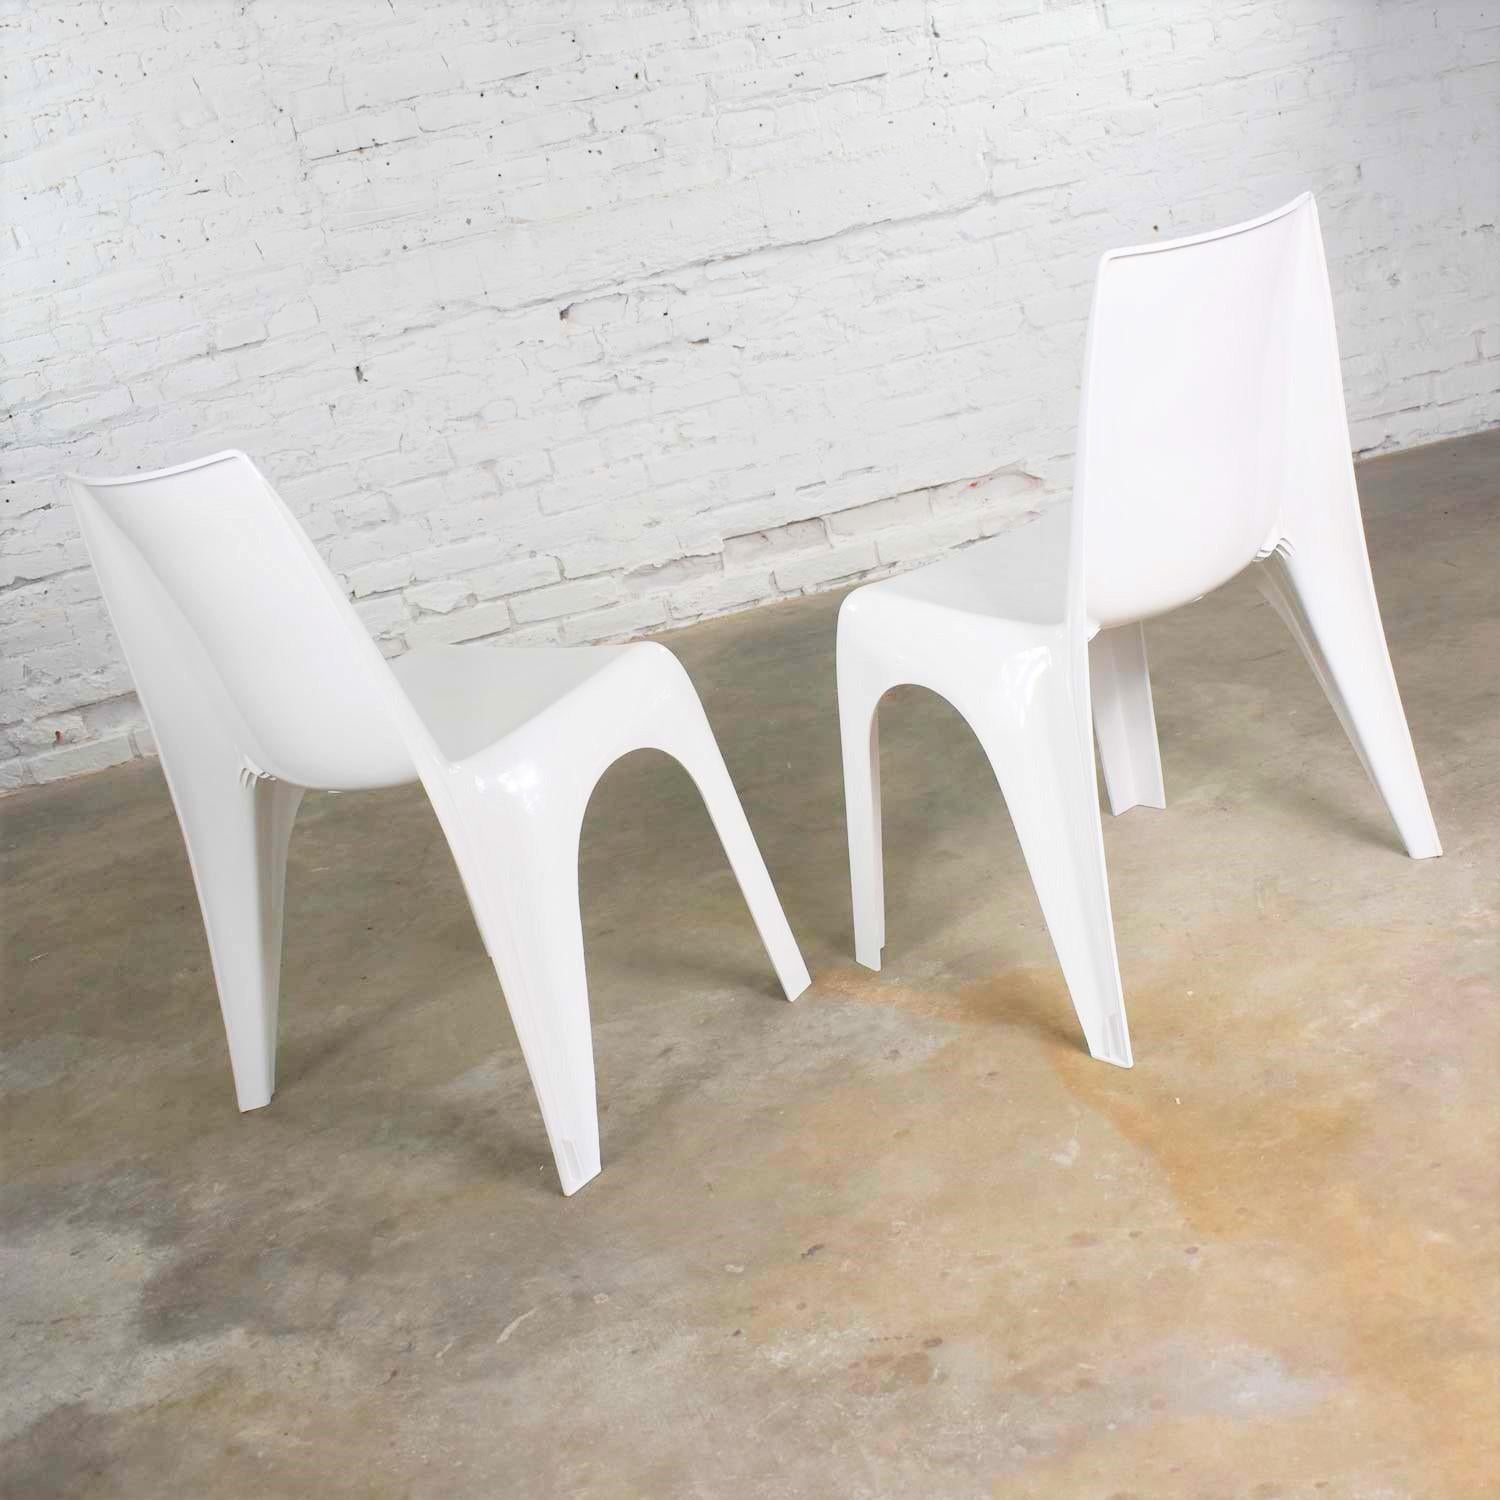 Late 20th Century Vintage Modern White Molded Plastic Chairs Style of Kartell 4850 by Castiglioni For Sale